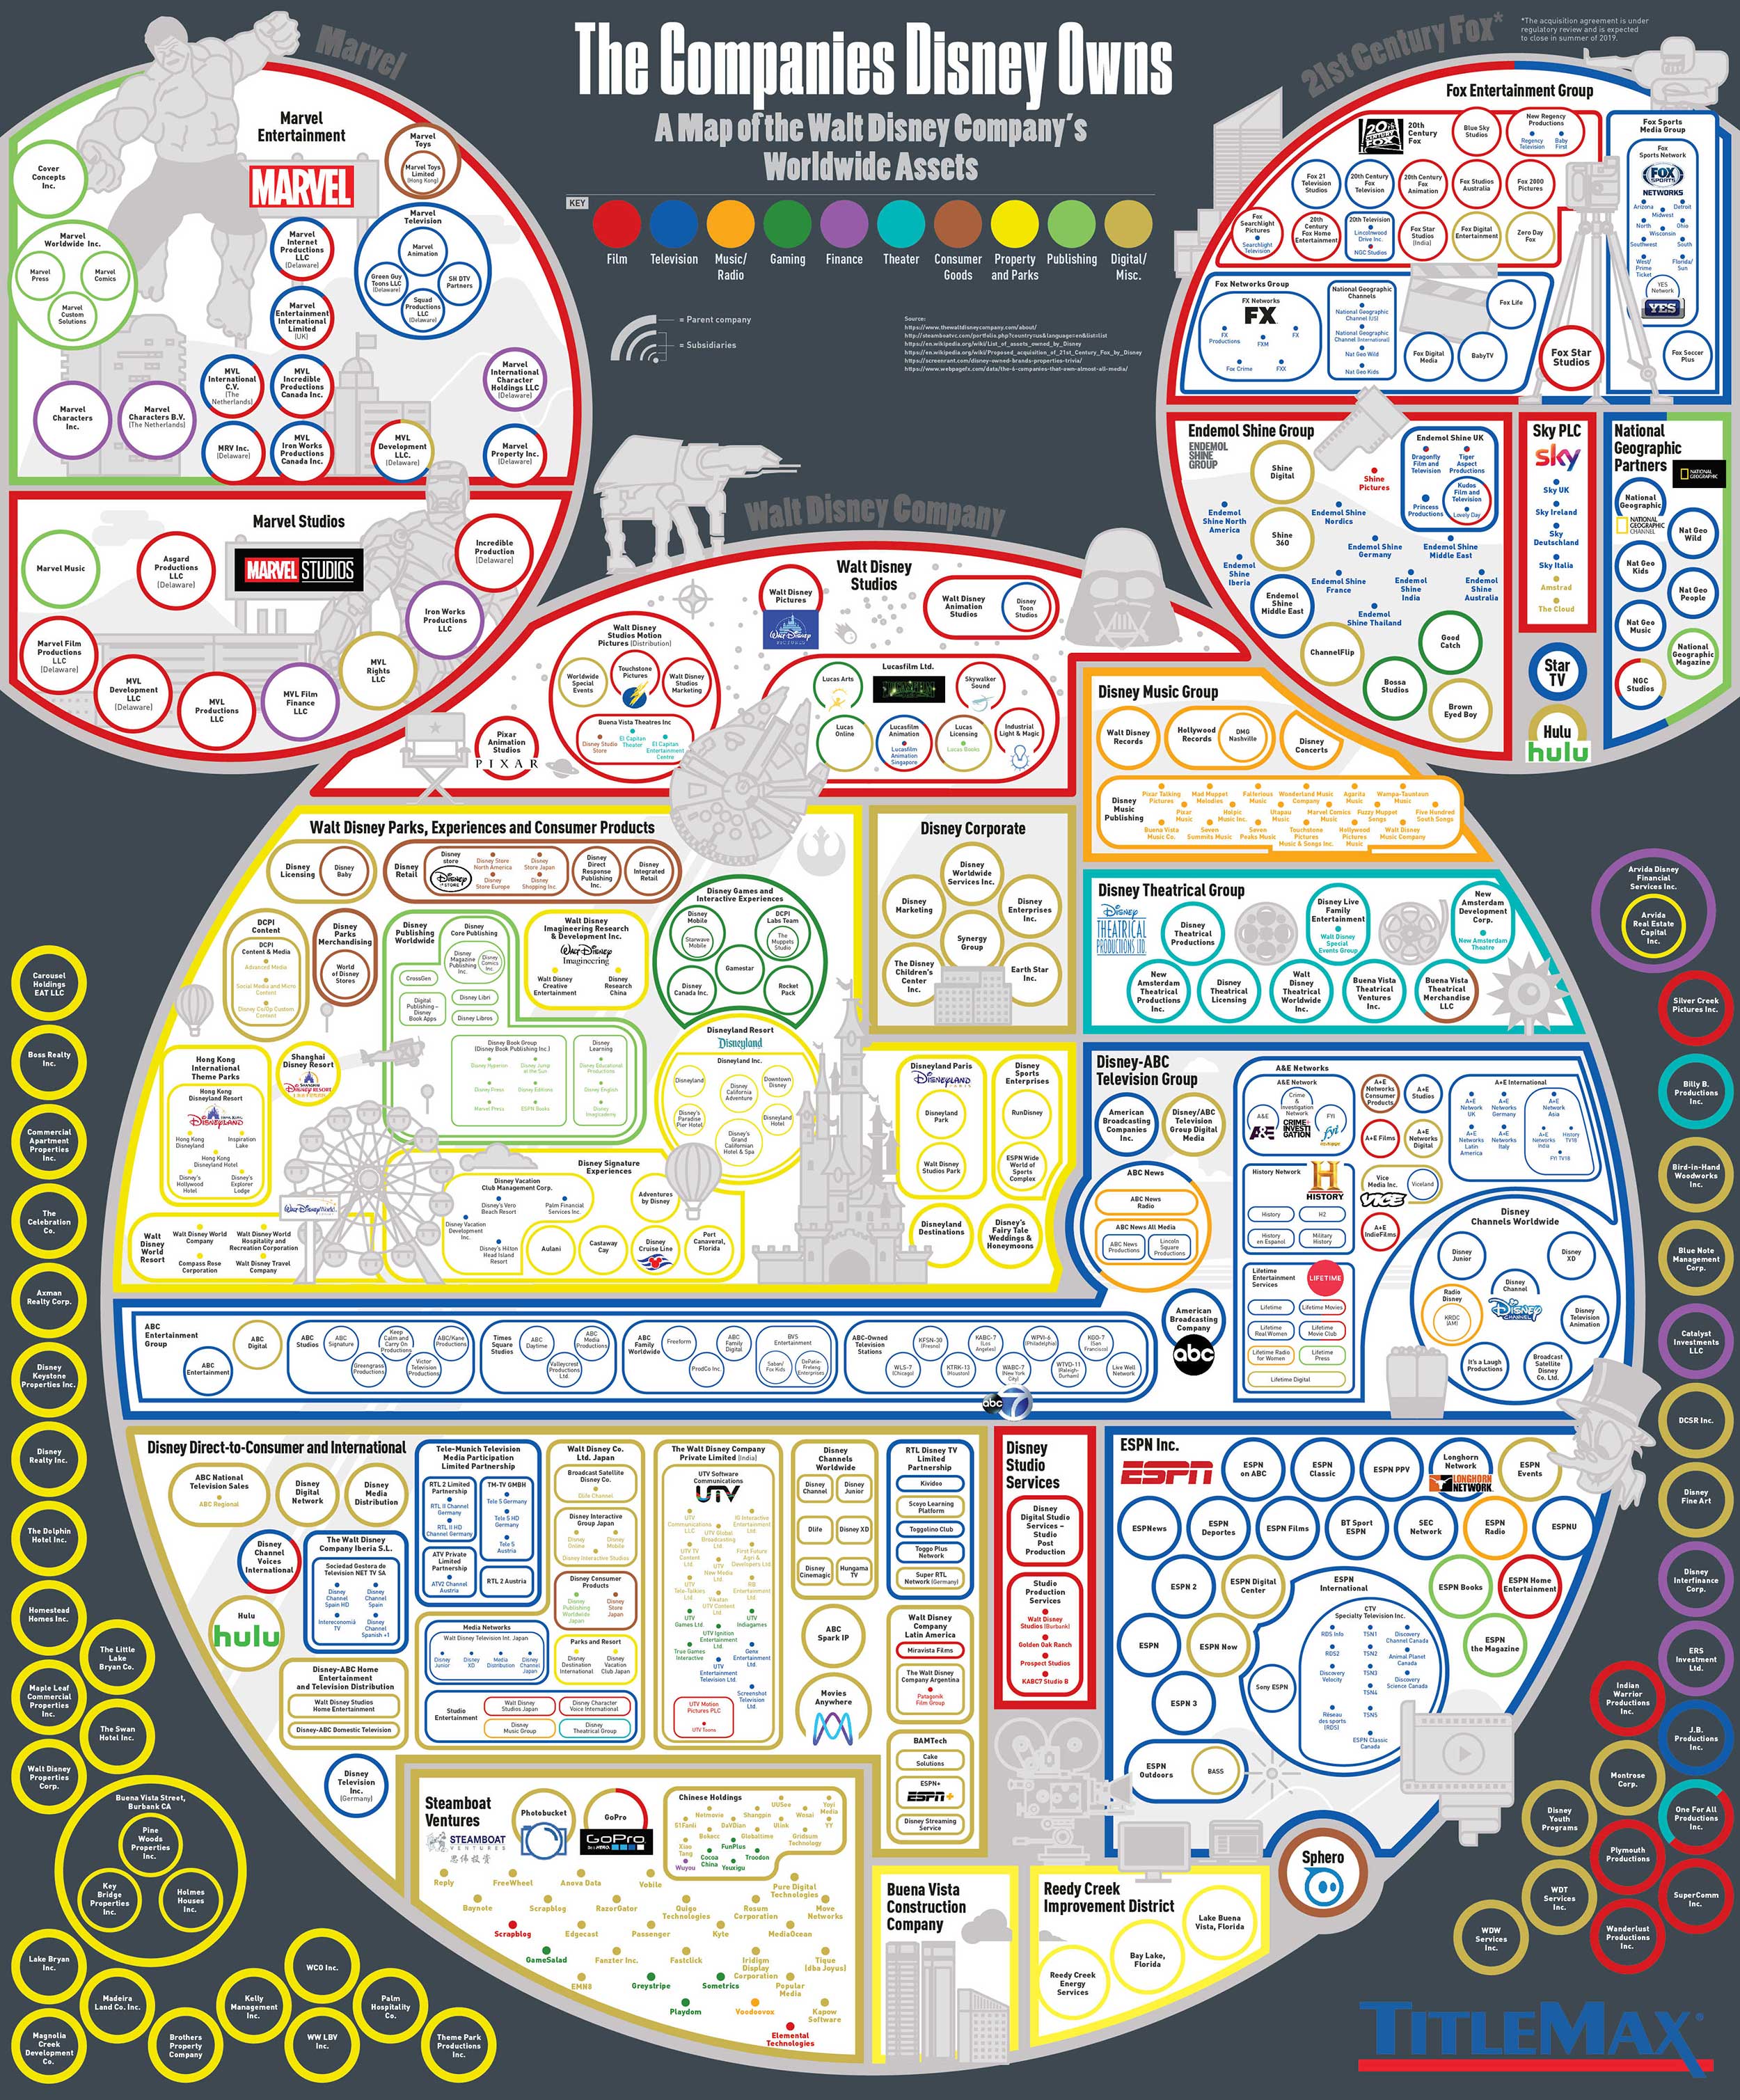 Every Company Disney Owns: A Map of Disney's Worldwide Assets